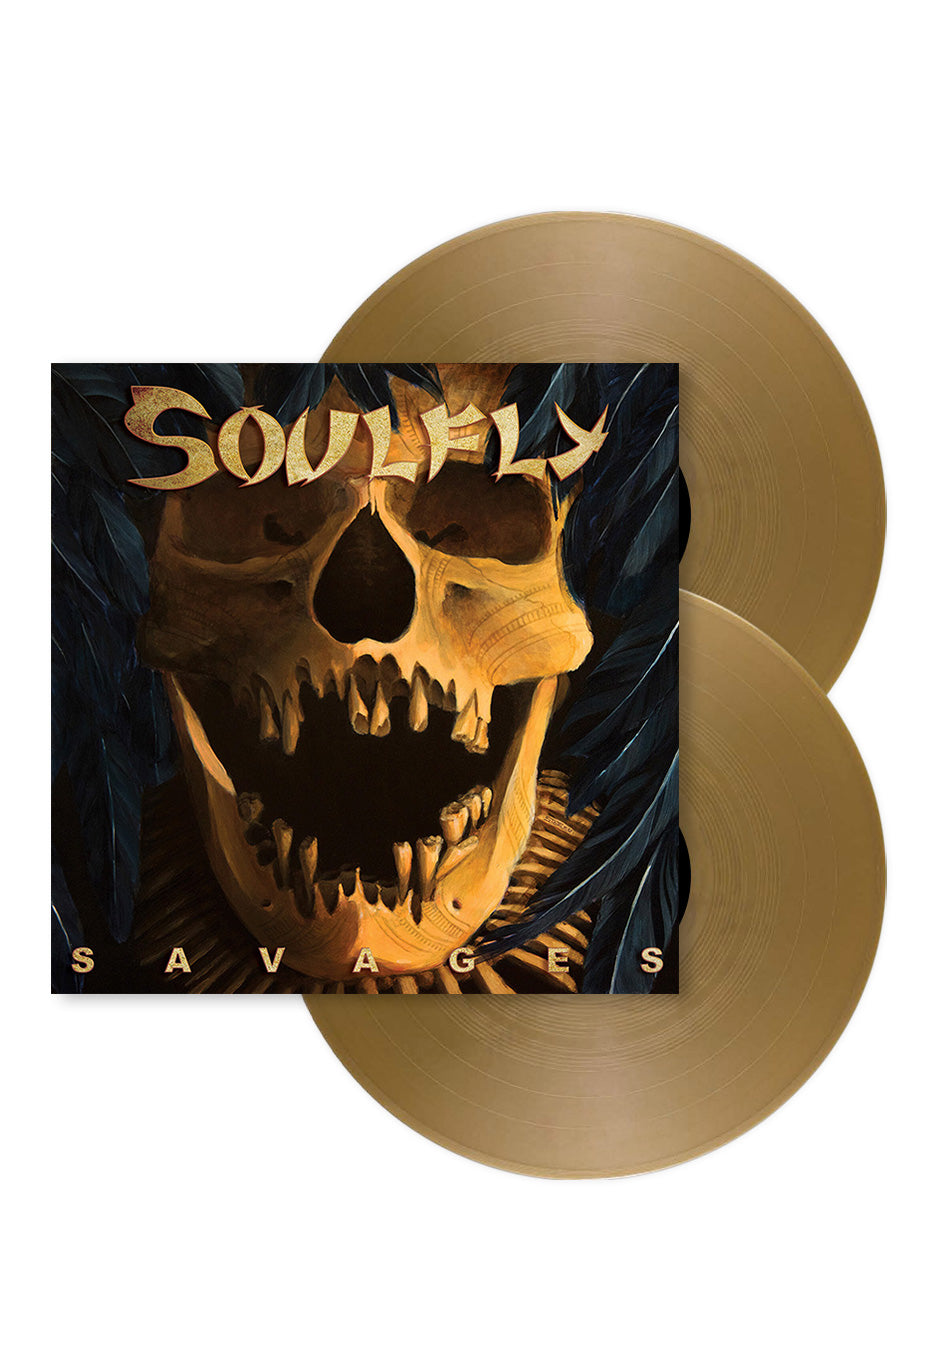 Soulfly - Savages (10th Anniversary) Ltd. Gold - Colored 2 Vinyl